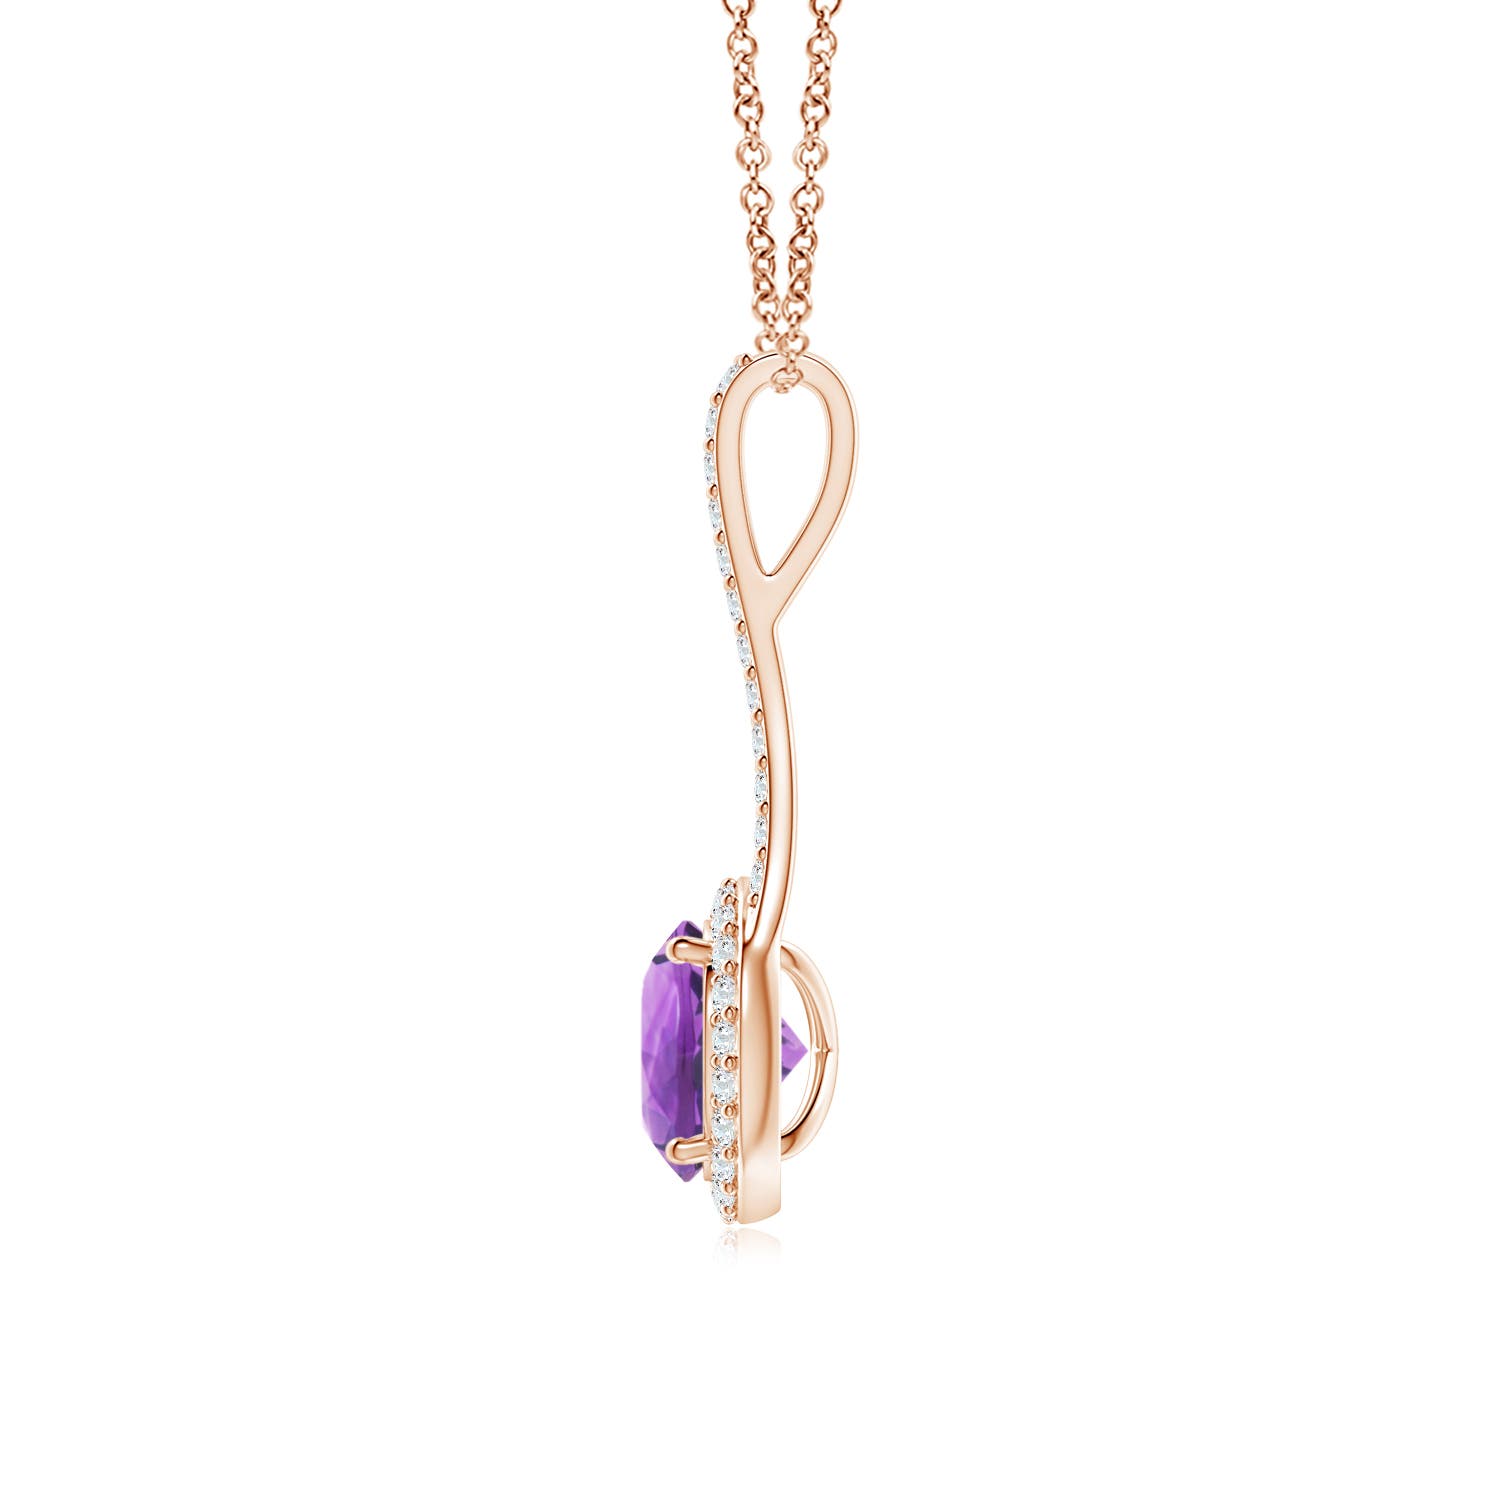 AA - Amethyst / 1.42 CT / 14 KT Rose Gold